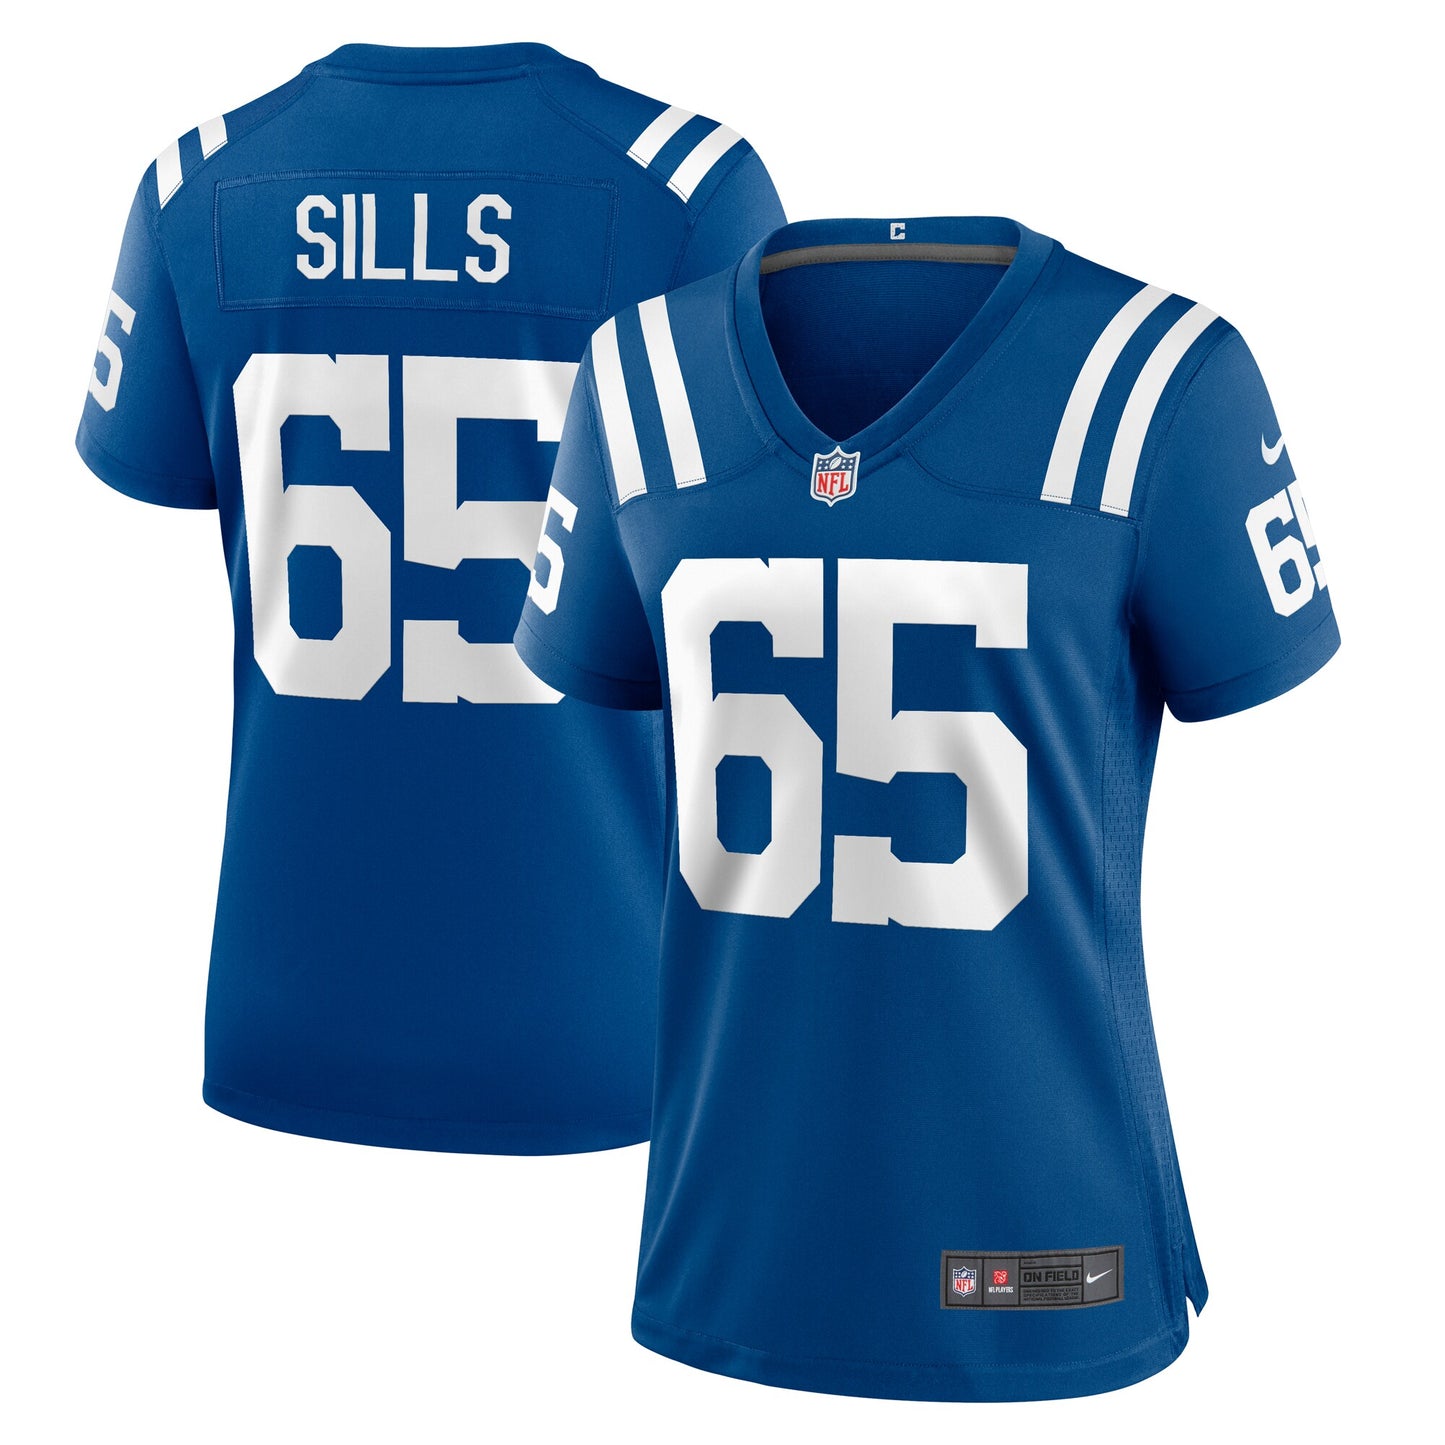 Josh Sills Indianapolis Colts Nike Women's Team Game Jersey -  Royal